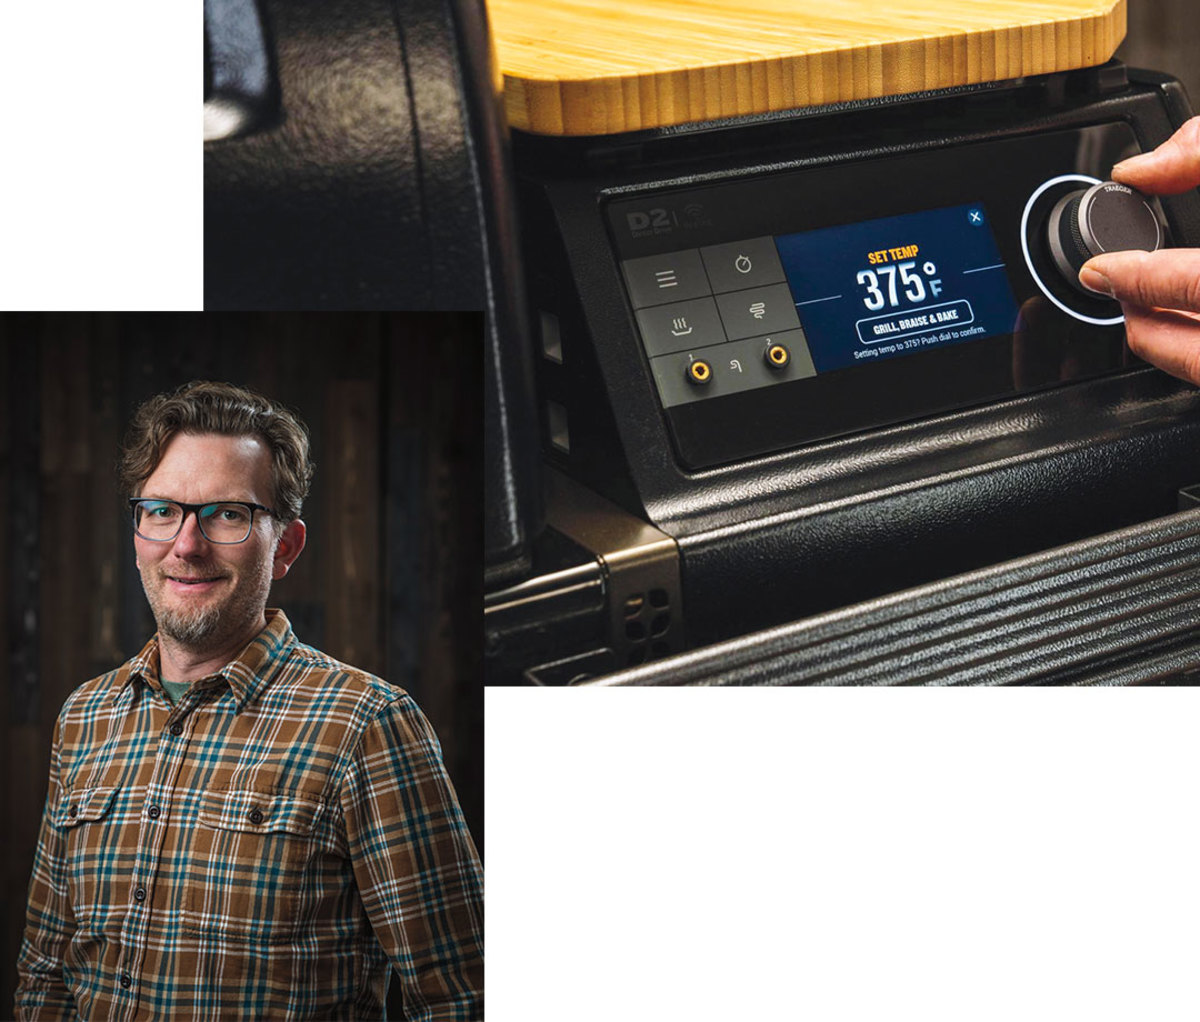 Matt Czach, vice president of product experience and design at Traeger